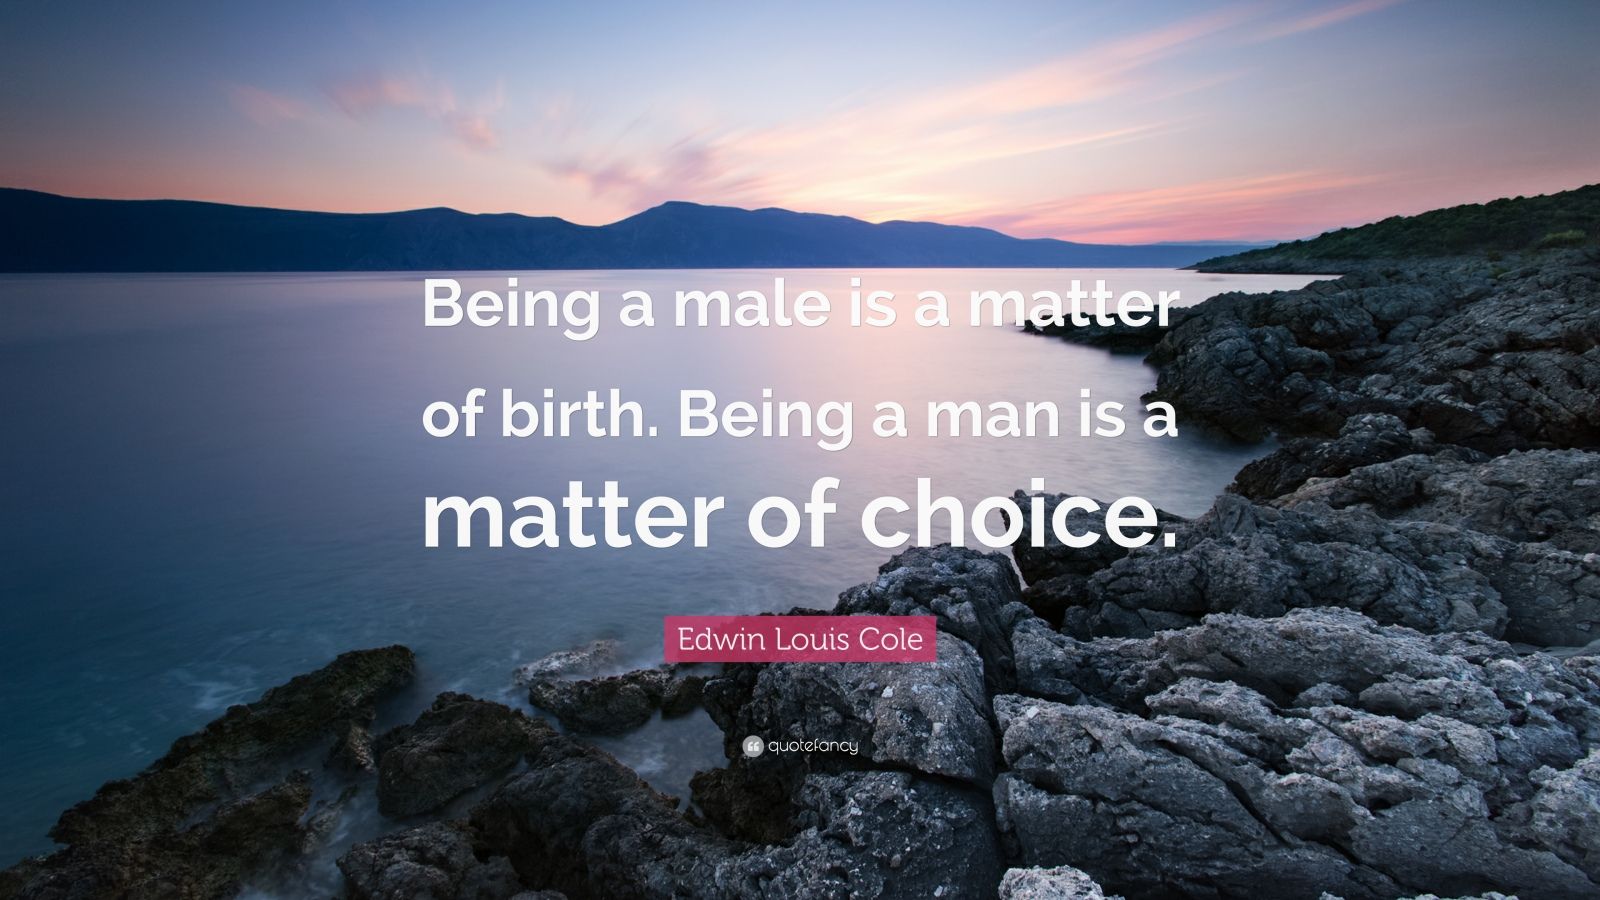 Edwin Louis Cole Quote: “Being a male is a matter of birth. Being a man is